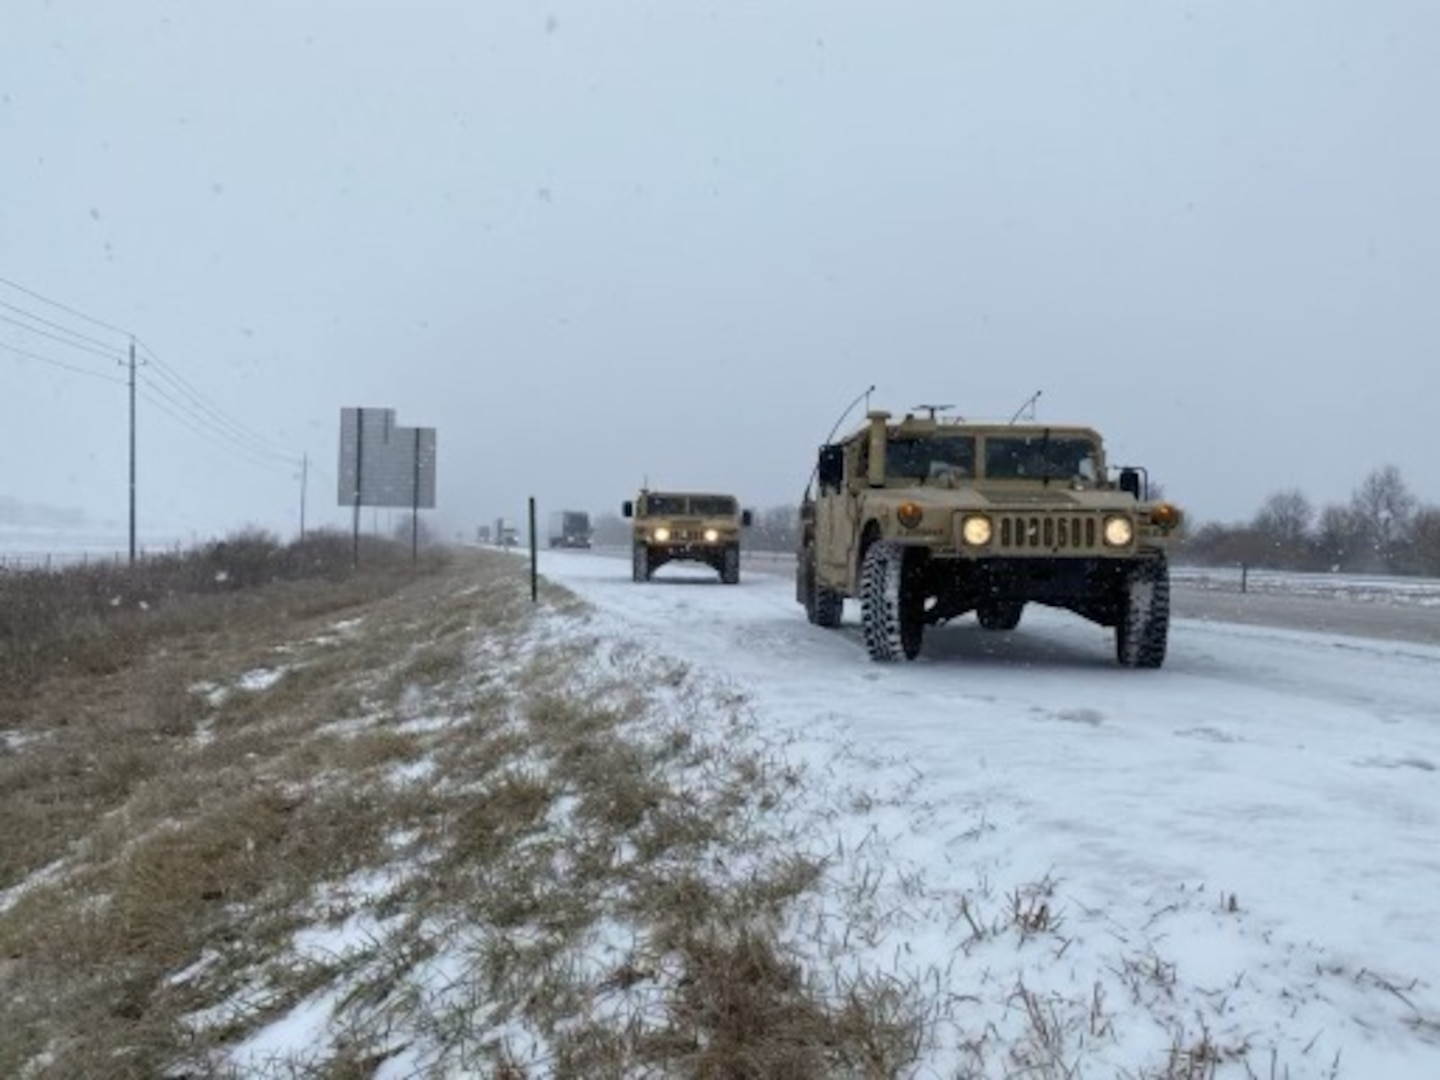 Indiana Guardsmen from the 38th Combat Aviation Brigade pull their Humvees over in order to assist drivers who slid off the road due to severe winter weather conditions, Thursday, Feb. 3, 2022. A total of 60 highway teams assisted along Hoosier highways with 20 in the northern part of the state, 20 in the central and 14 in the south, with an additional six ready to move to areas of the state with extreme weather impacts